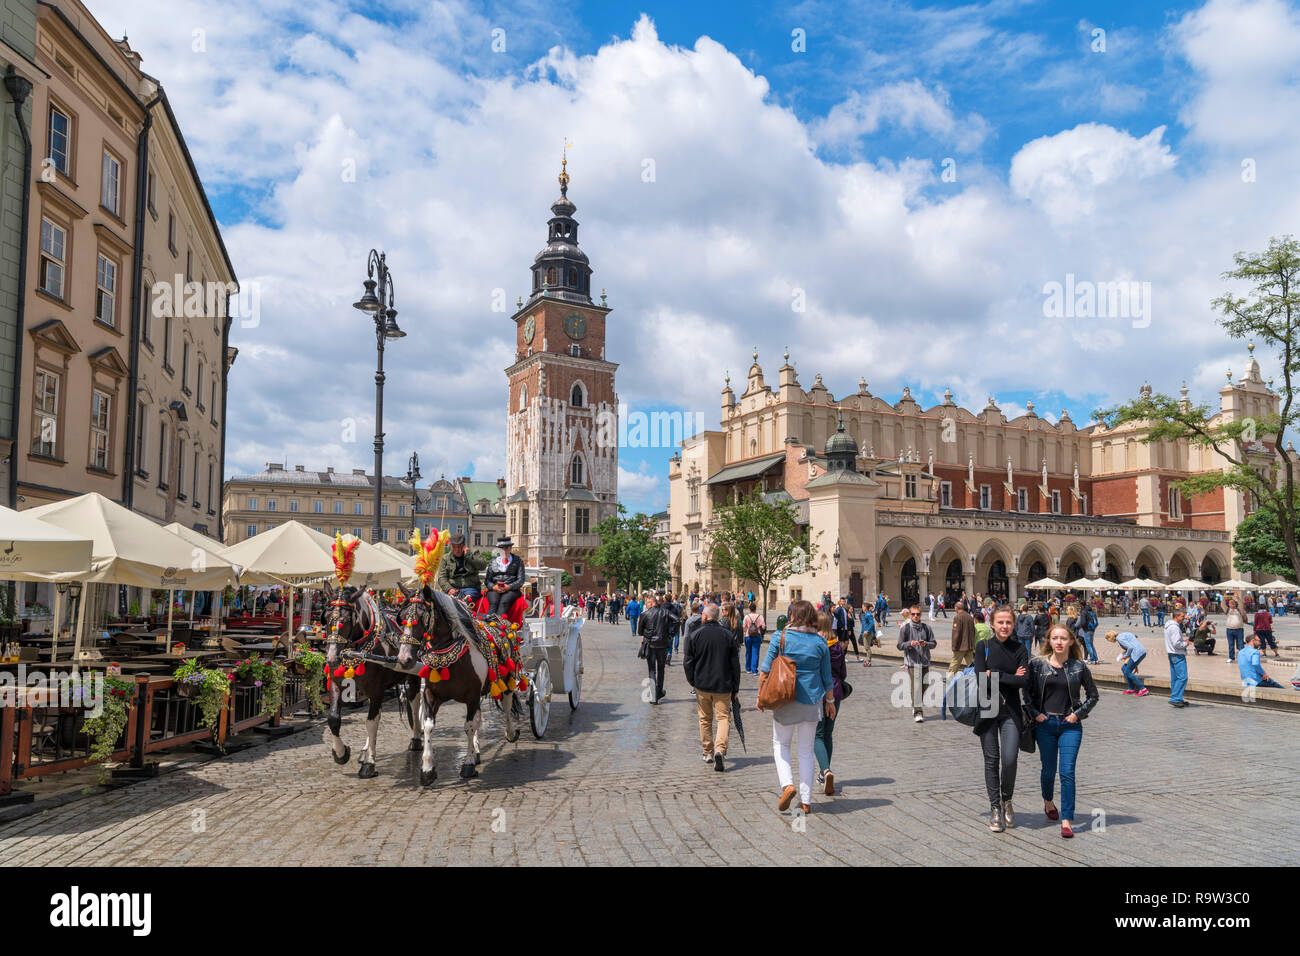 Horse and Carriage ride in front of the Town Hall Tower (Wieża ratuszowa) & Cloth Hall (Sukiennice) in the Main Square (Rynek Główny), Kraków, Poland Stock Photo